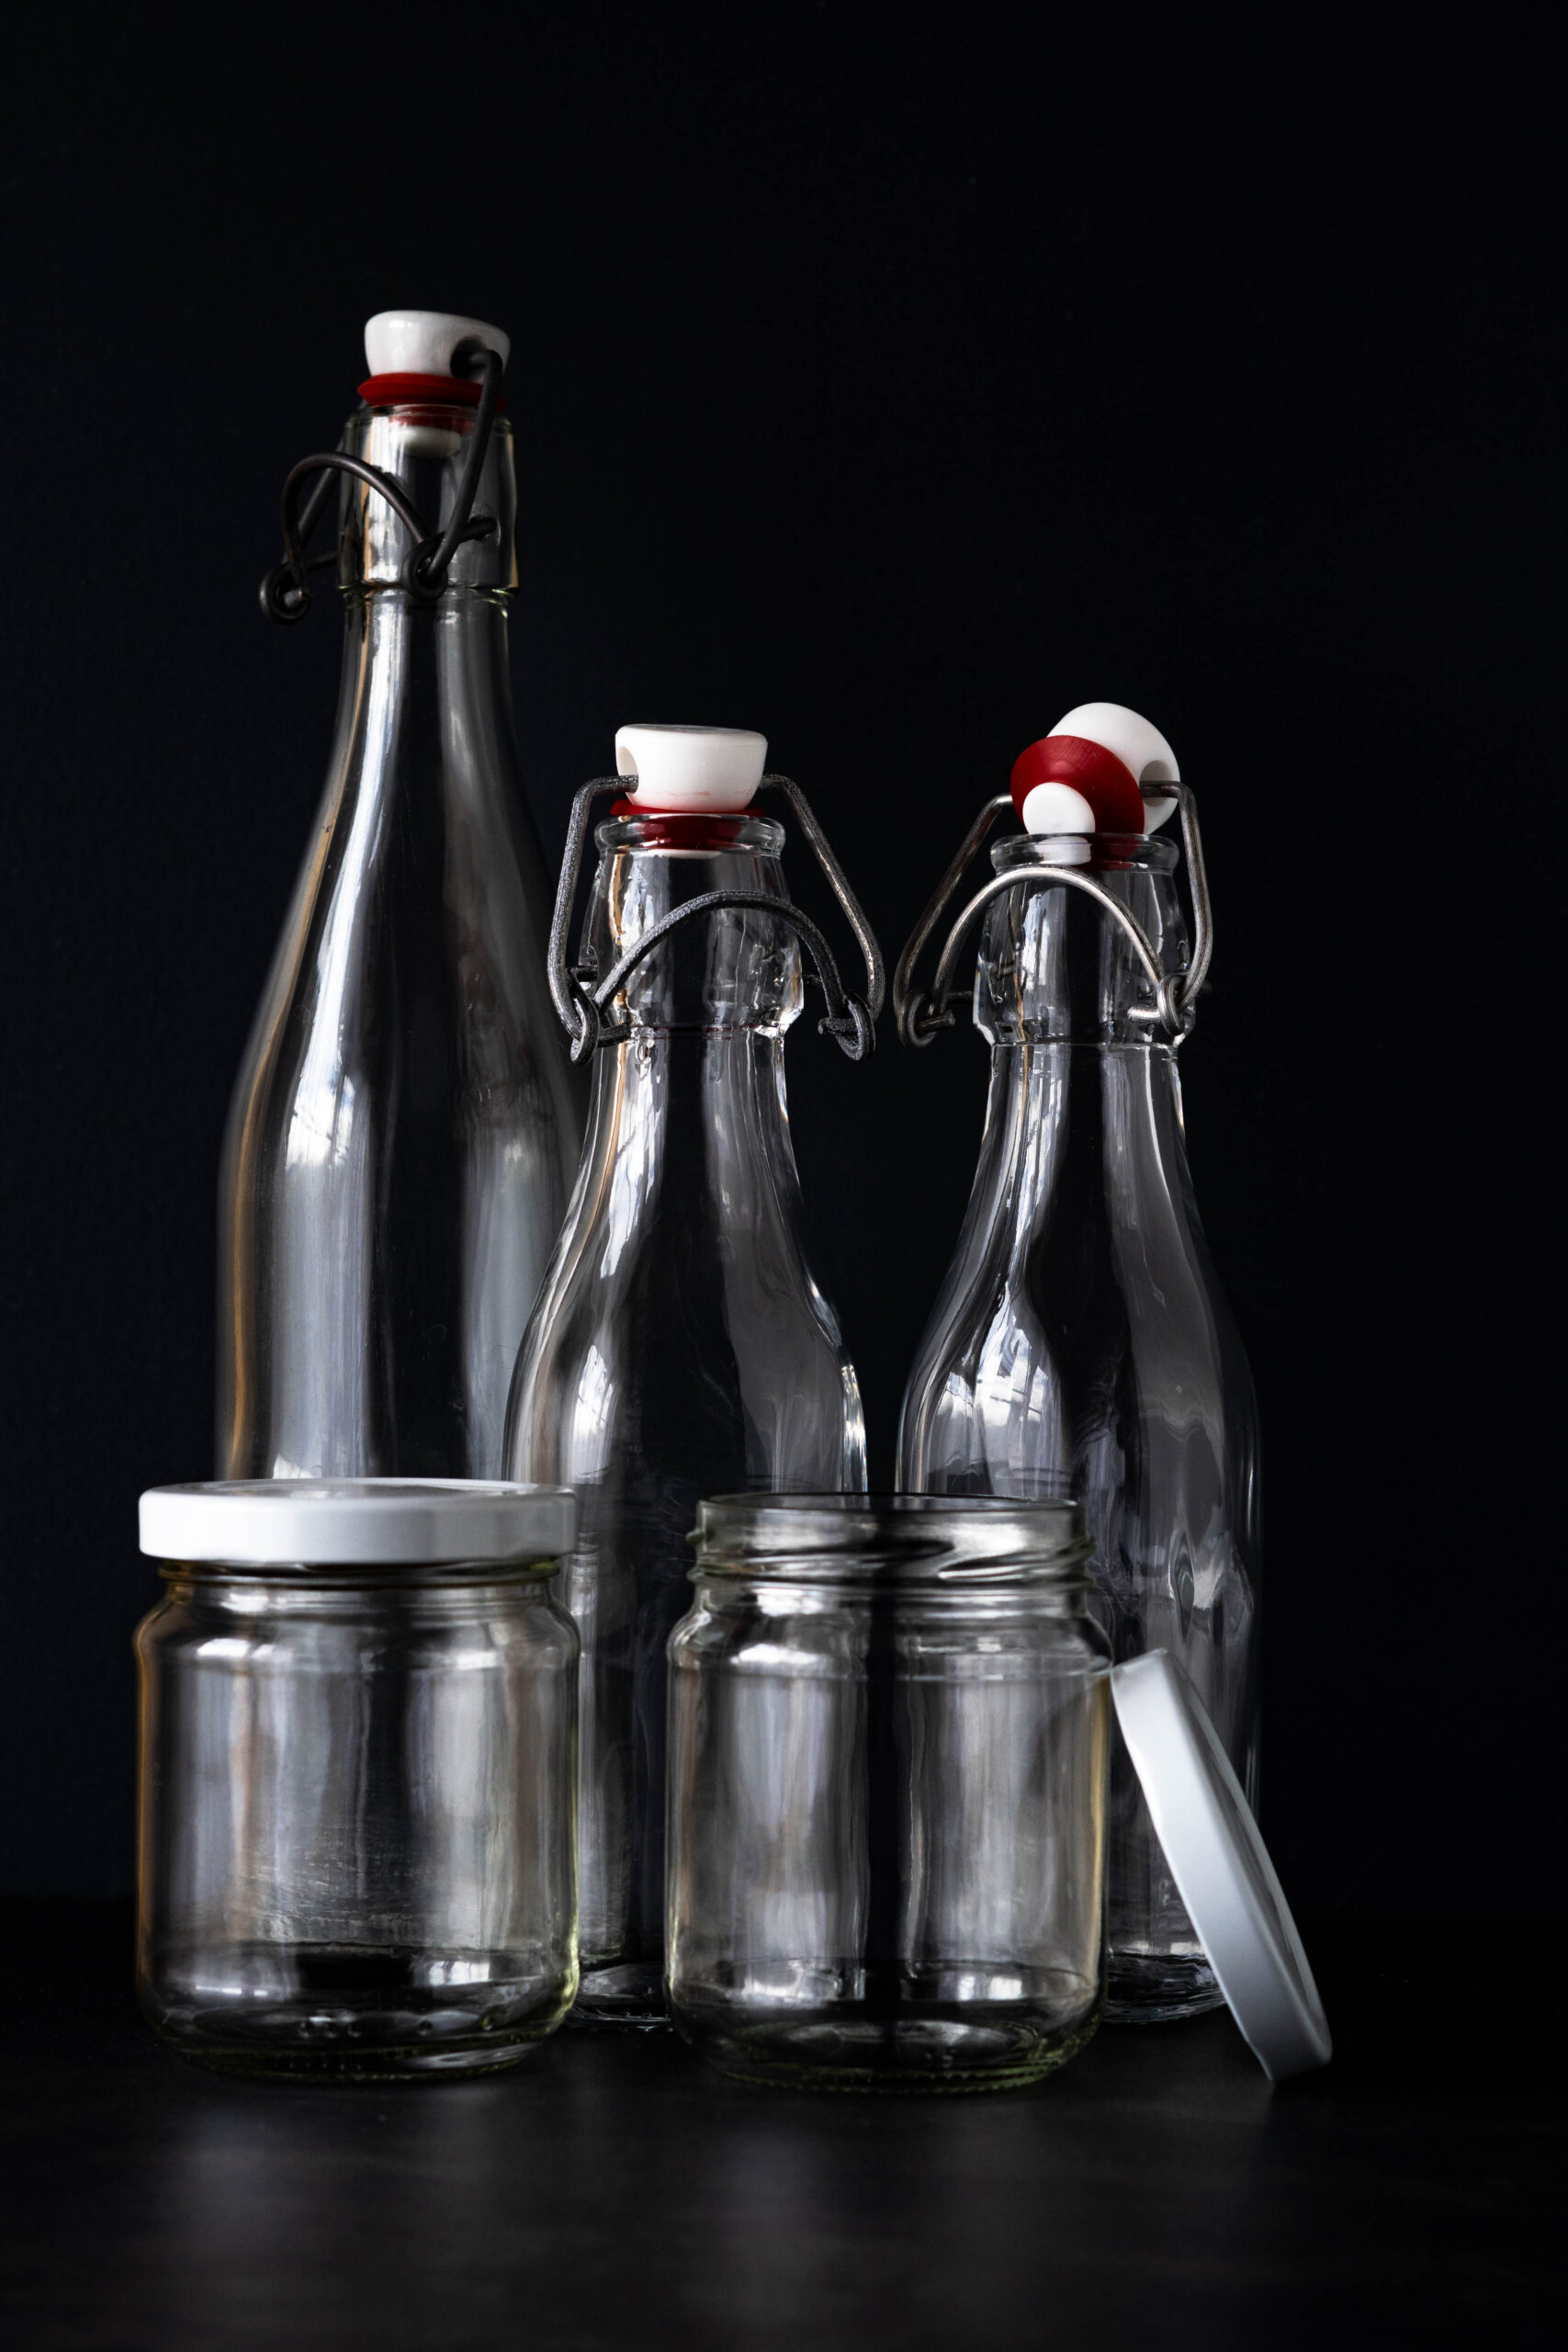 How to sterilize your bottles and jars